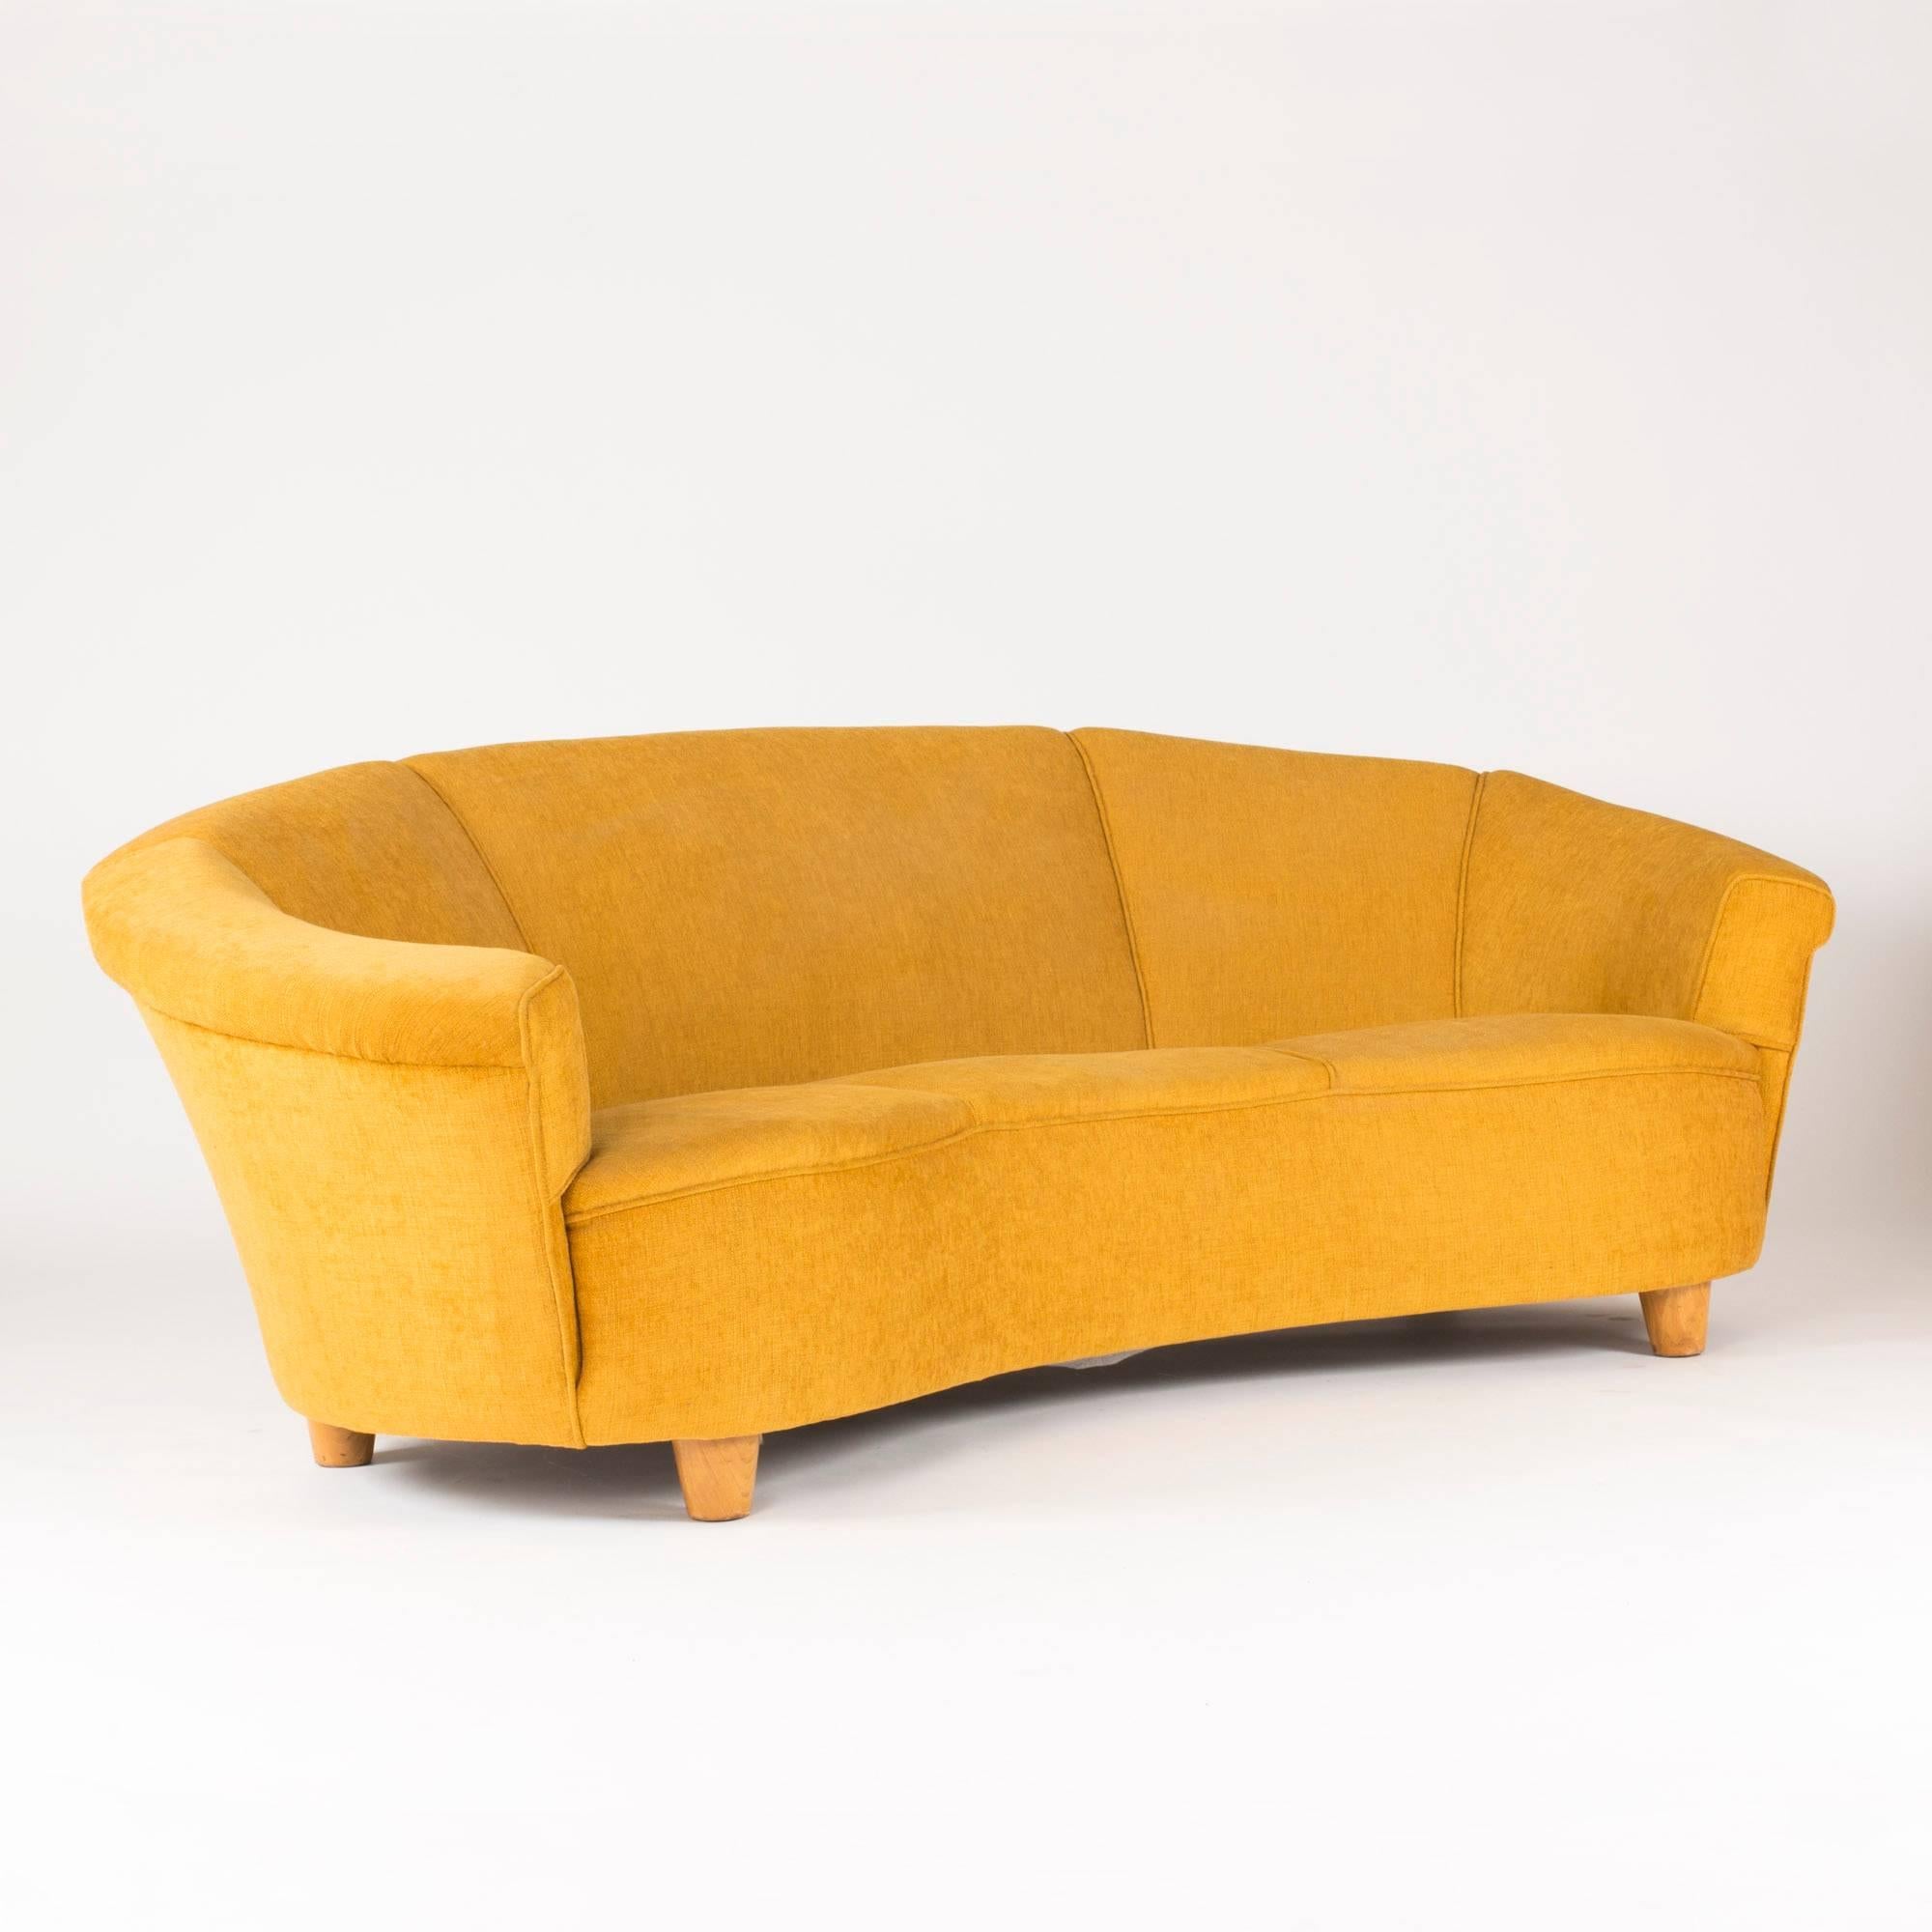 Luxurious, voluminous sofa in an inviting, curved shape with mustard yellow upholstery. In the style of Otto Schulz. Seat height 43 cm.